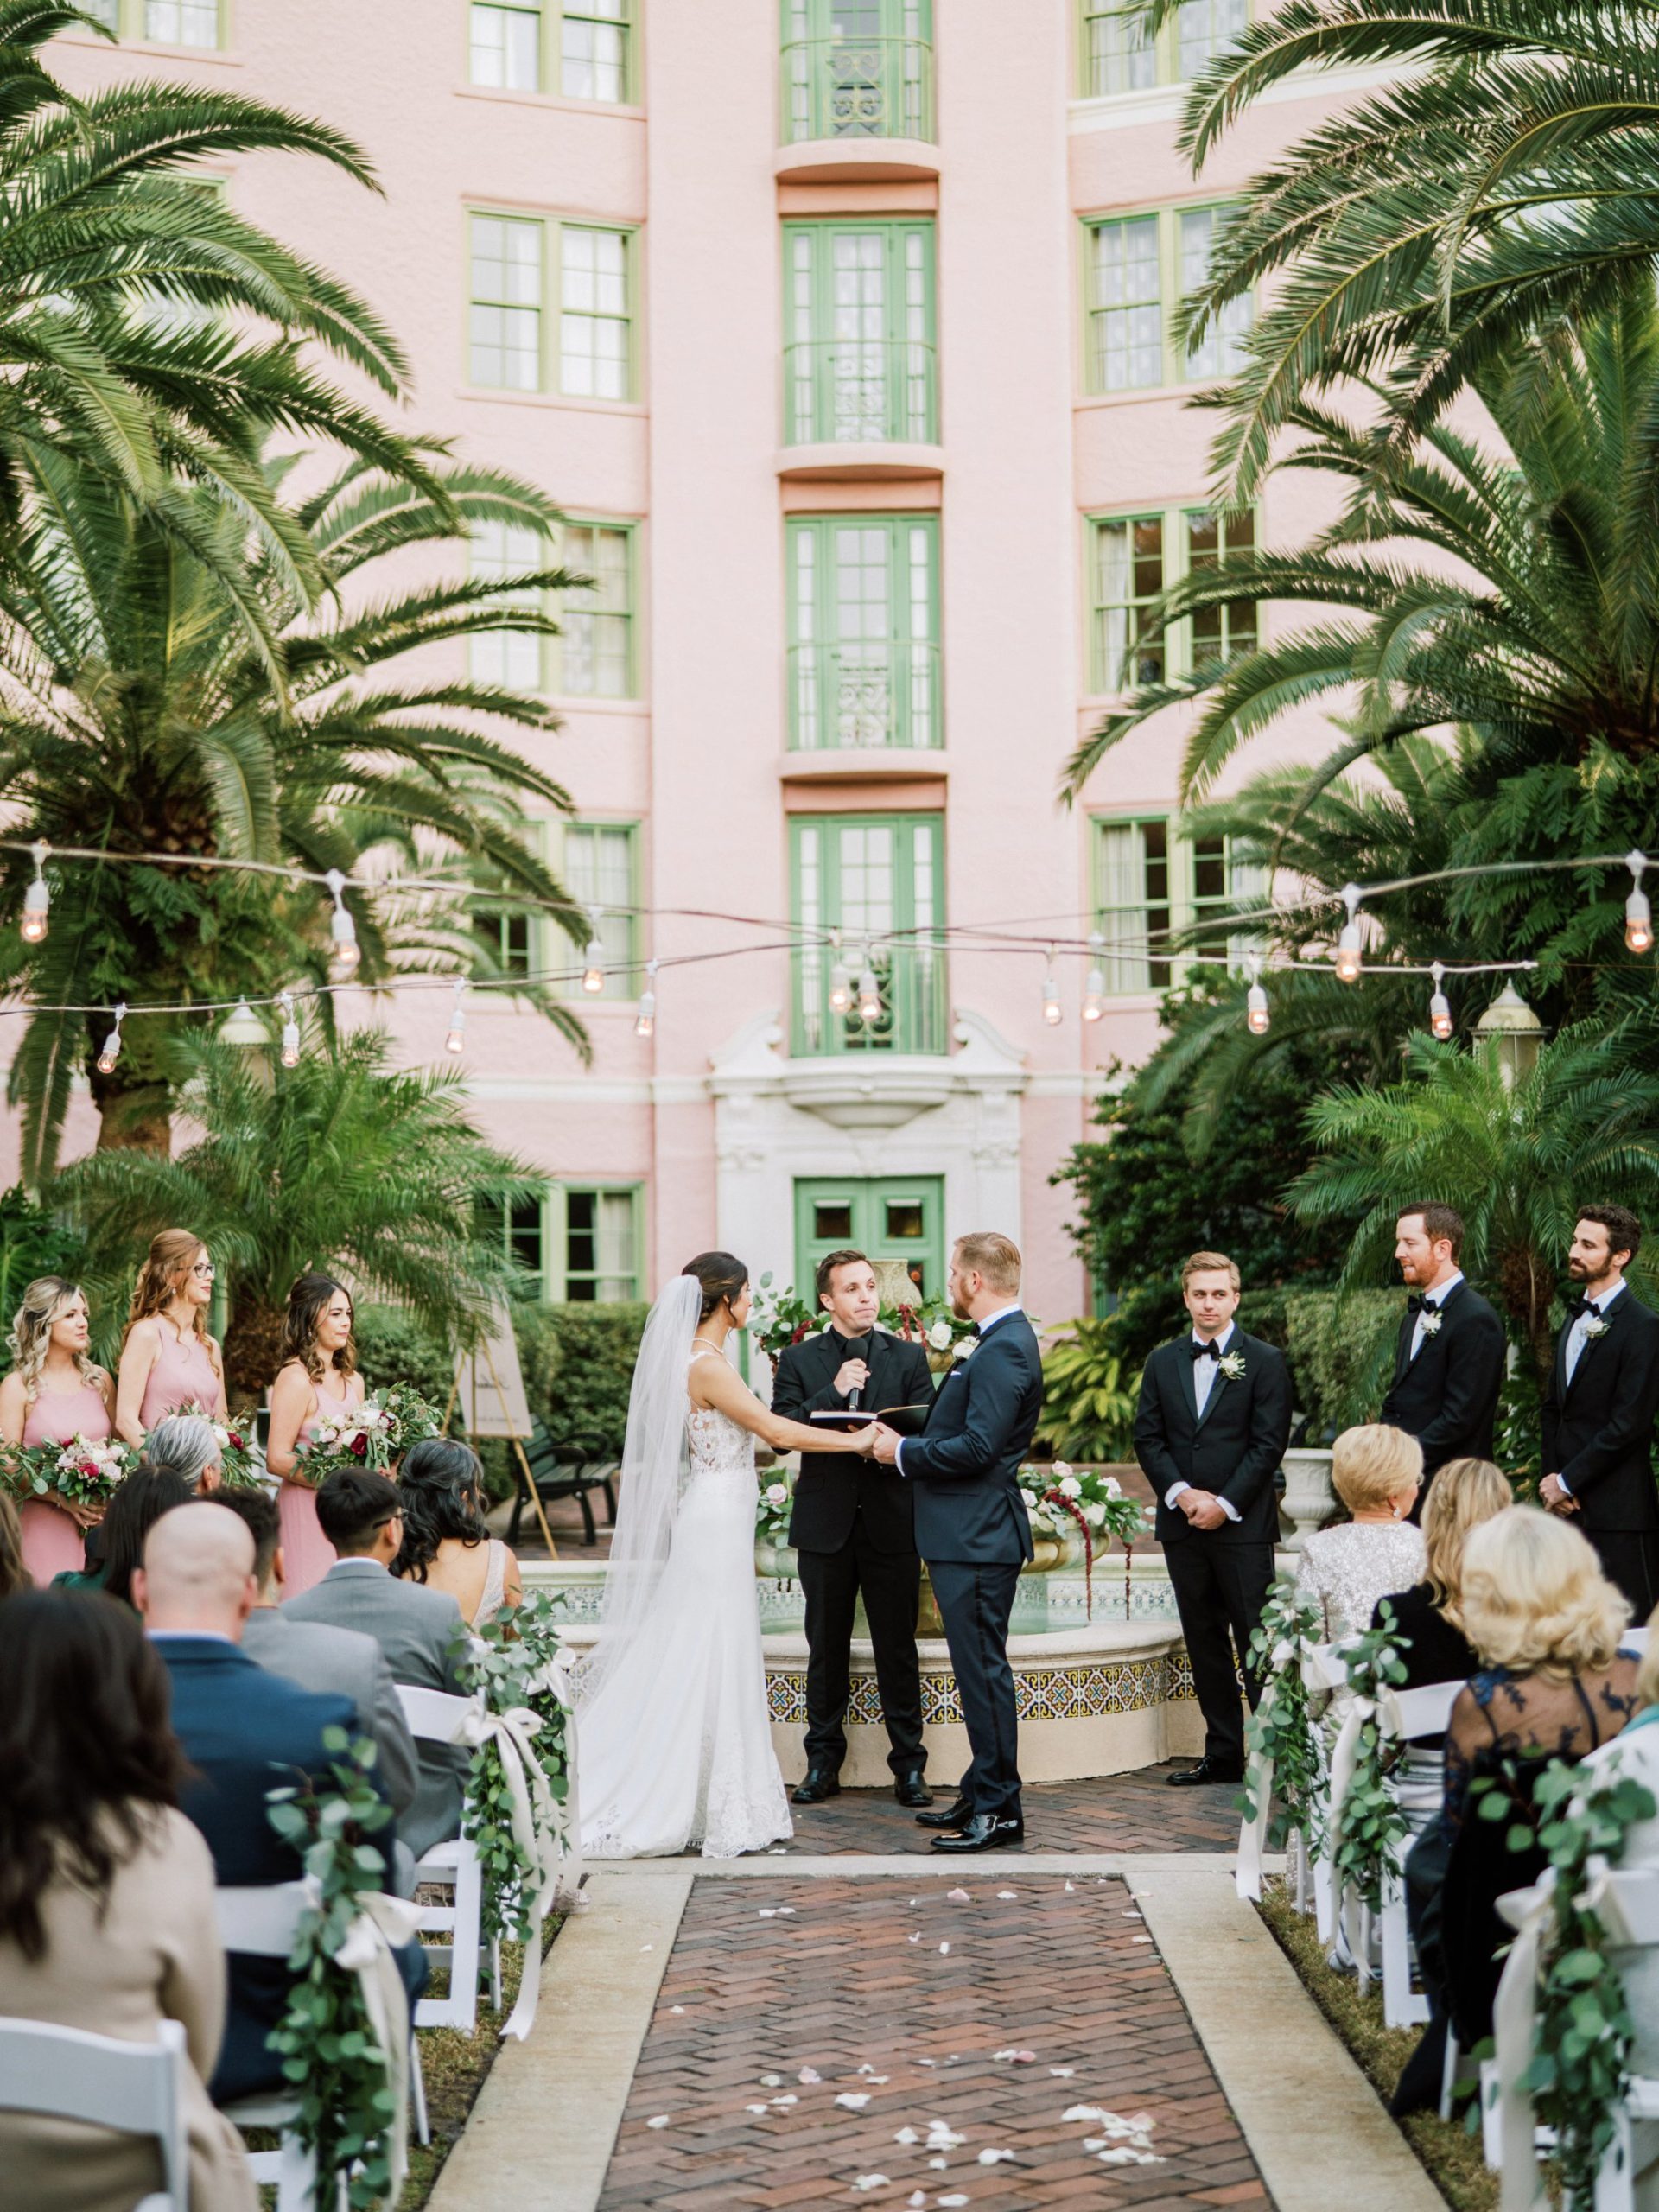 Ceremony in tea garden at the vinoy renaissance resort and golf club